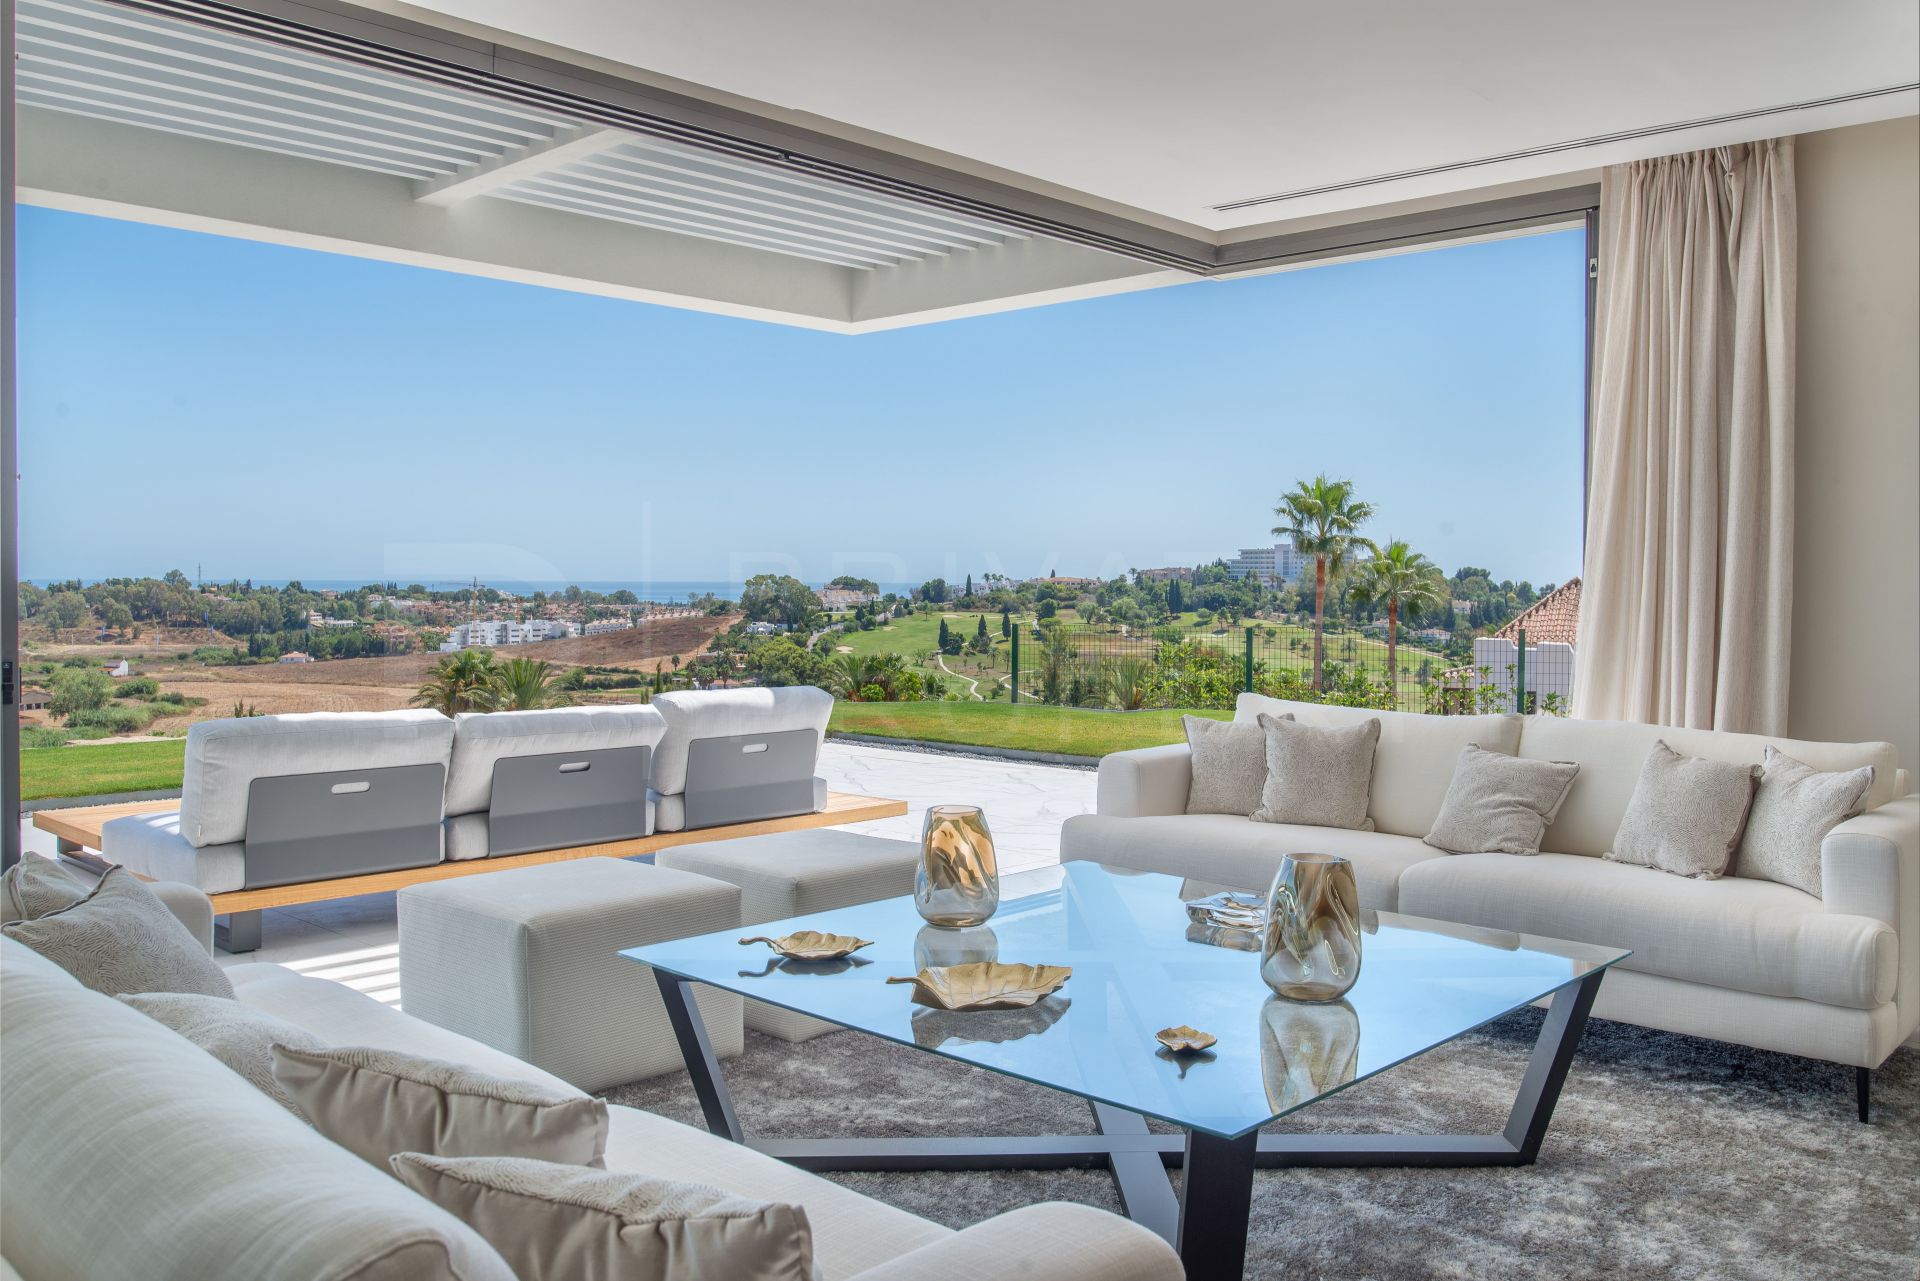 Infinity - Mirador del Paraíso: 24 apartments with wonderful views in a gated community